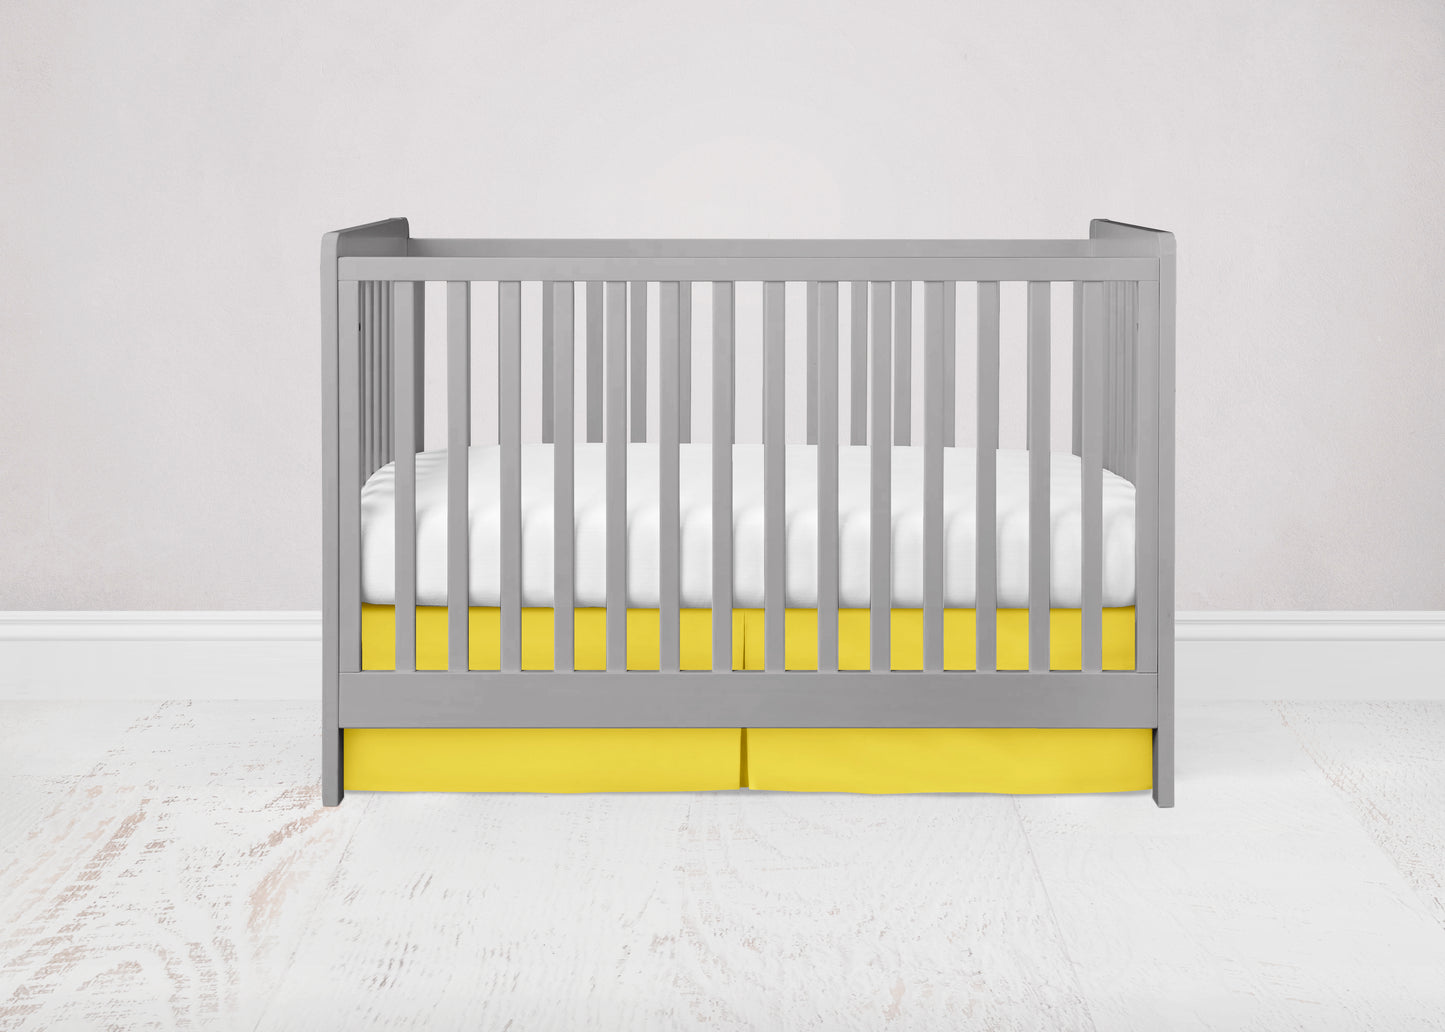 YELLOW CRIB SKIRT SHOWN IN THE PLEAT OPTION